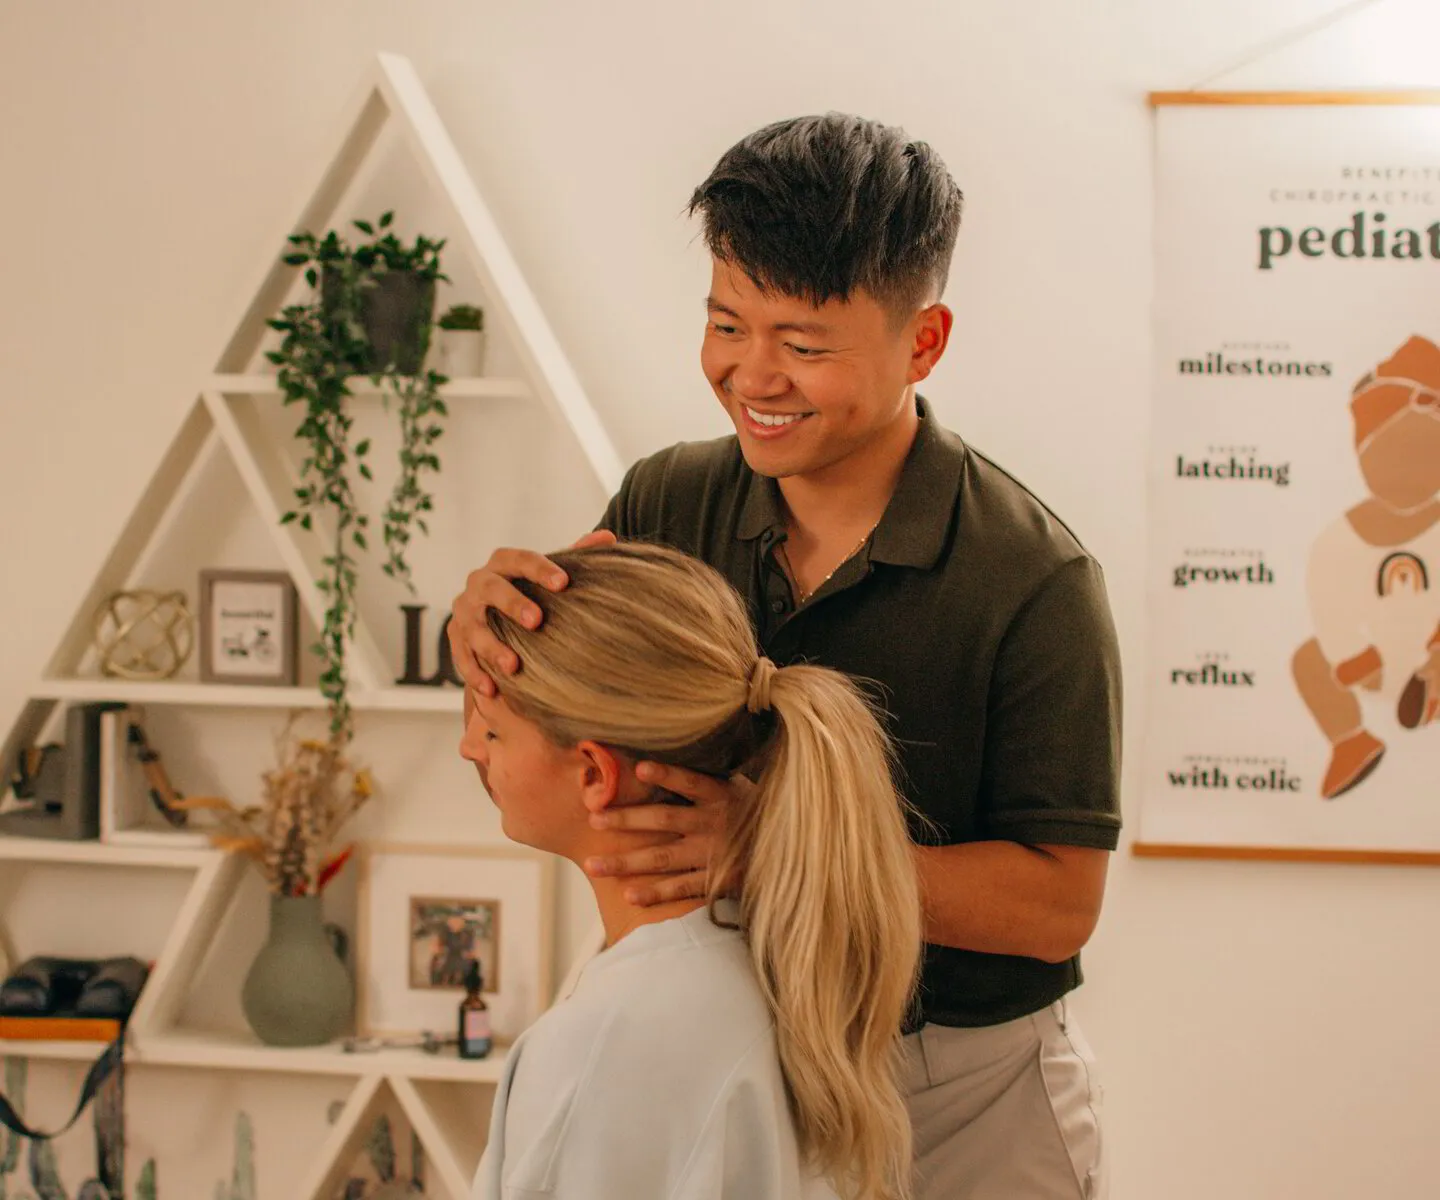 Dr. Binh smiles warmly while gently examining a patient's neck, in his clinic